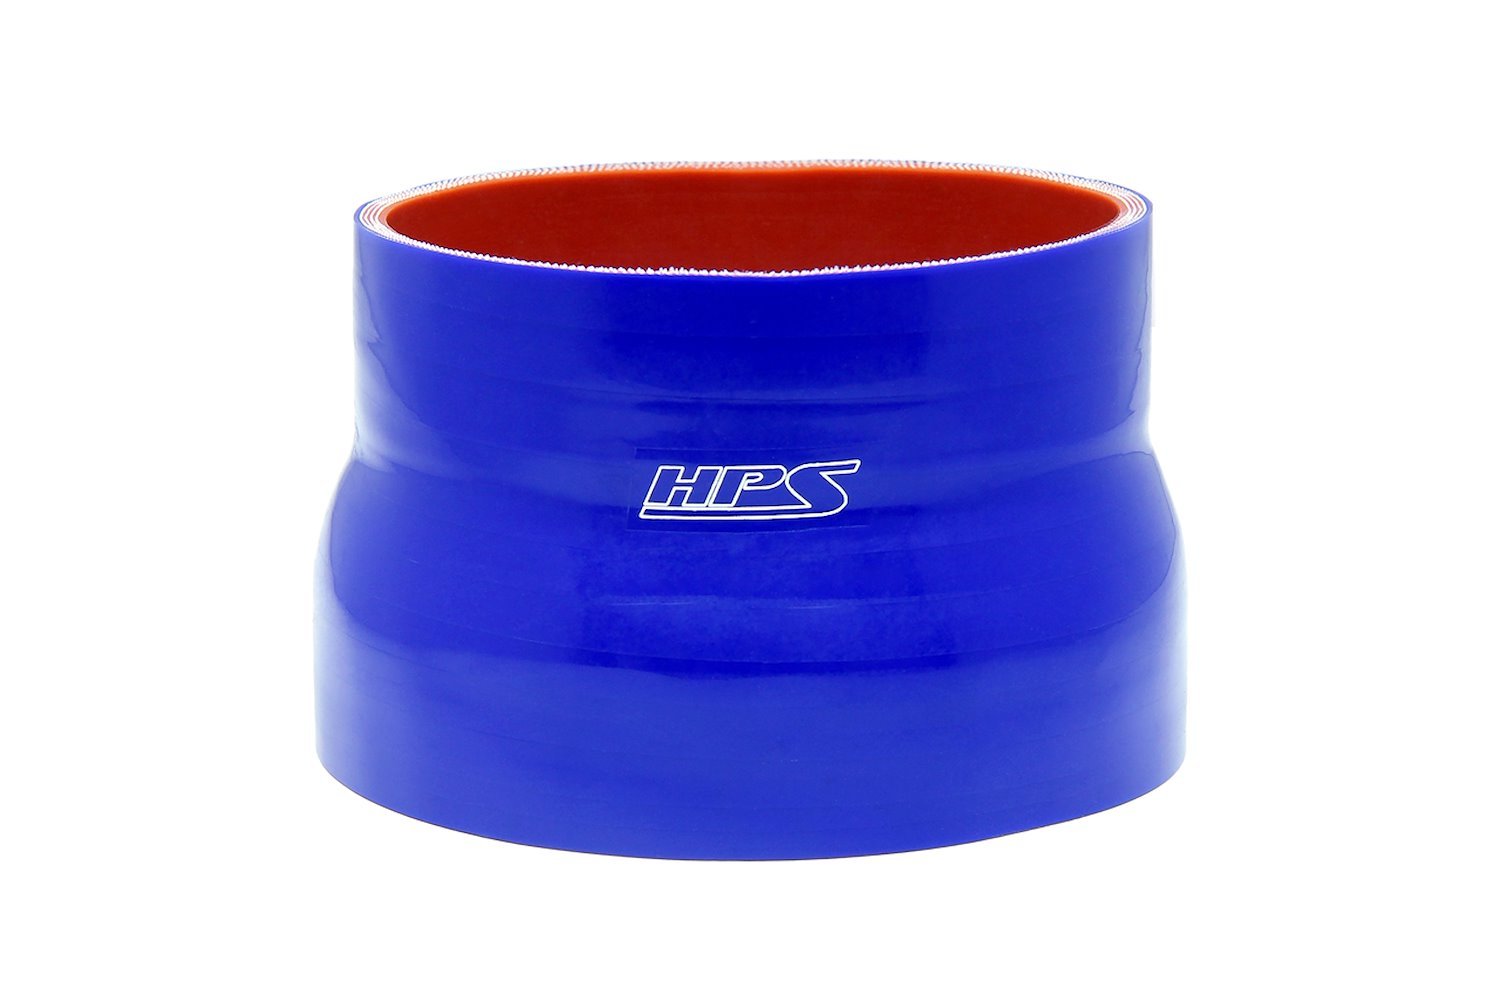 HTSR-425-450-L5-BLUE Silicone Reducer Hose, High-Temp 4-Ply Reinforced, 4-1/4 in. - 4-1/2 in. ID, 5 in. Long, Blue